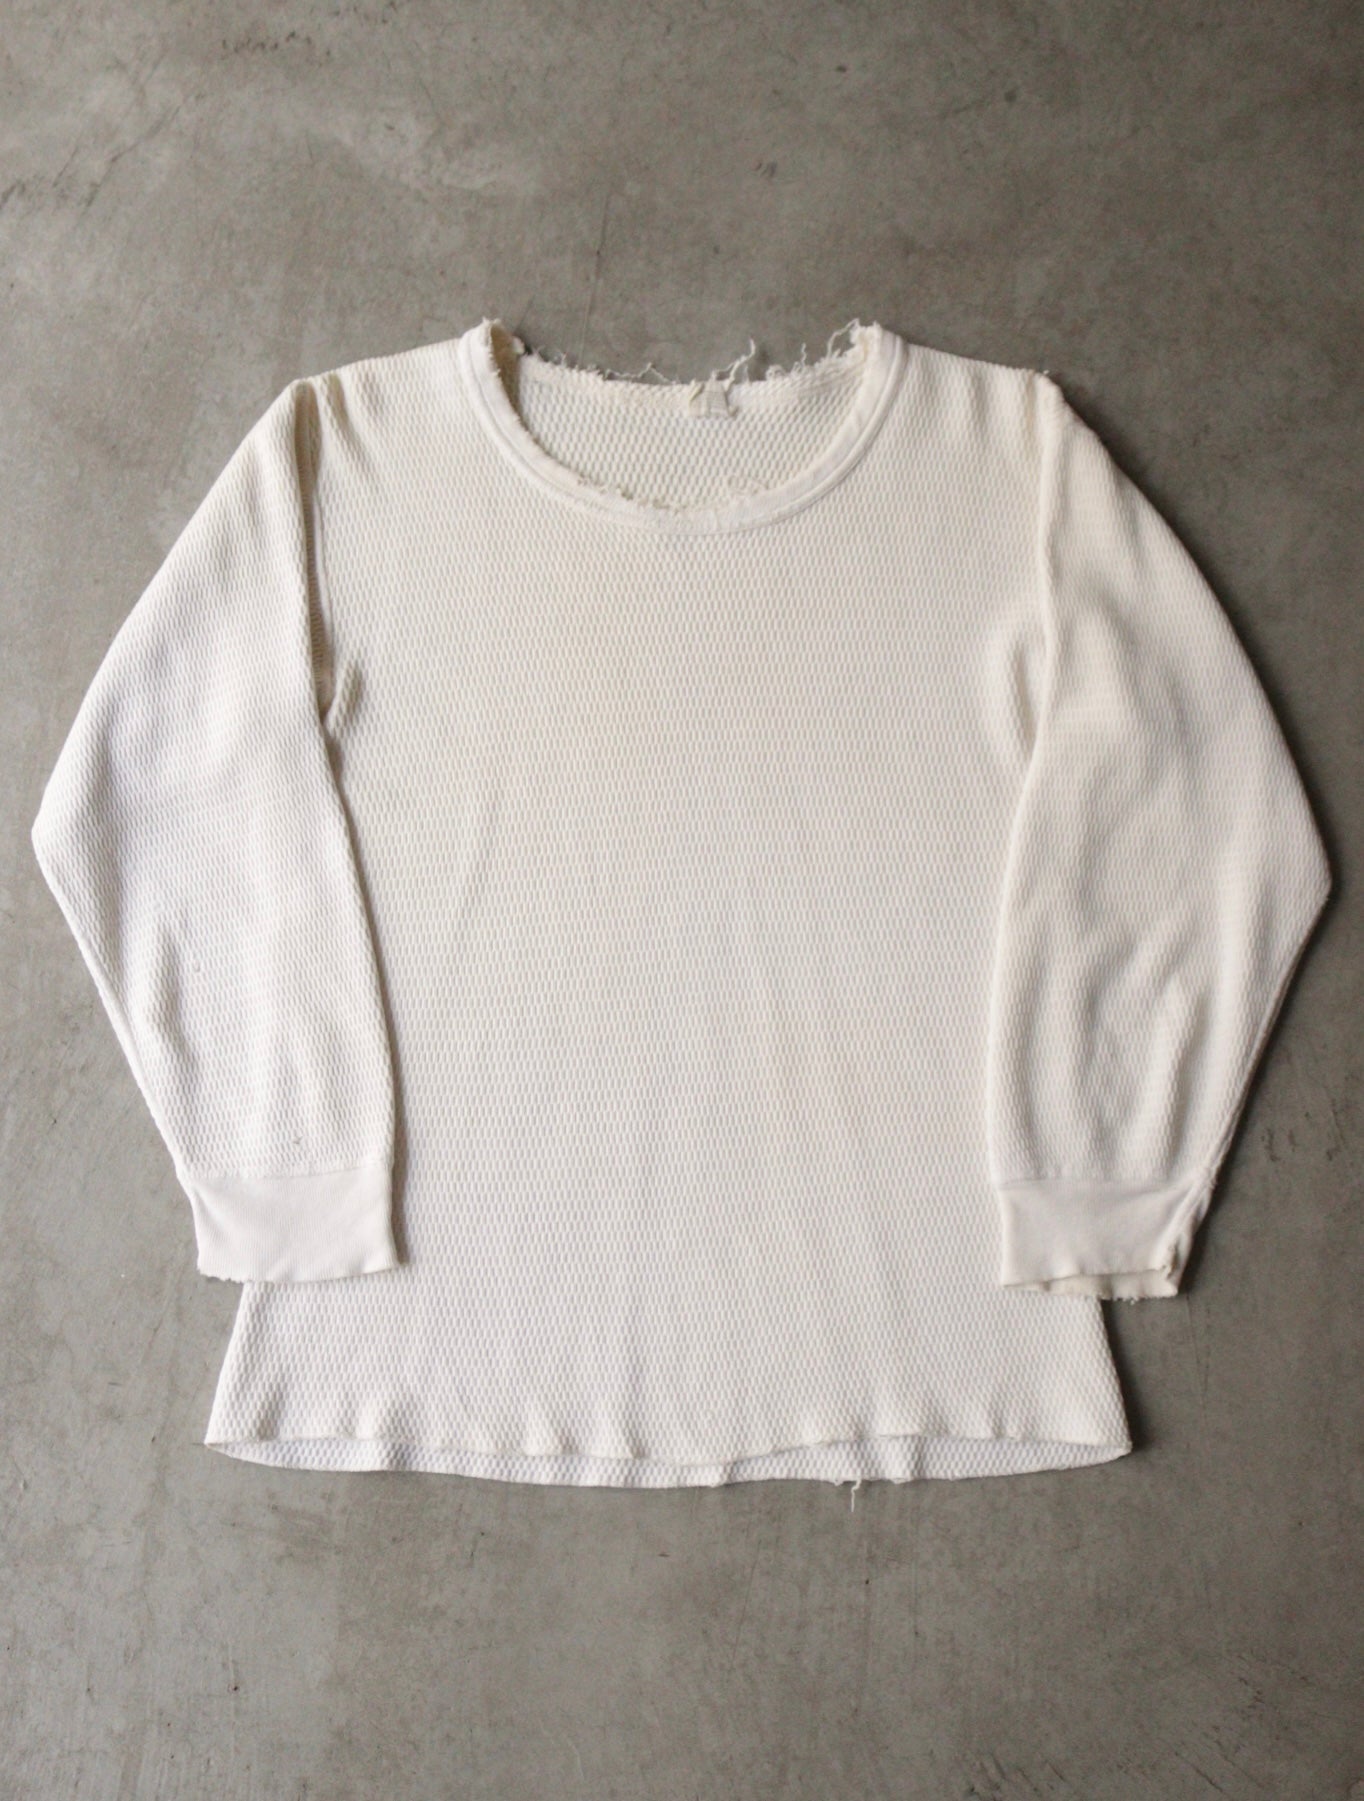 1980S DISTRESSED THERMAL SHIRT